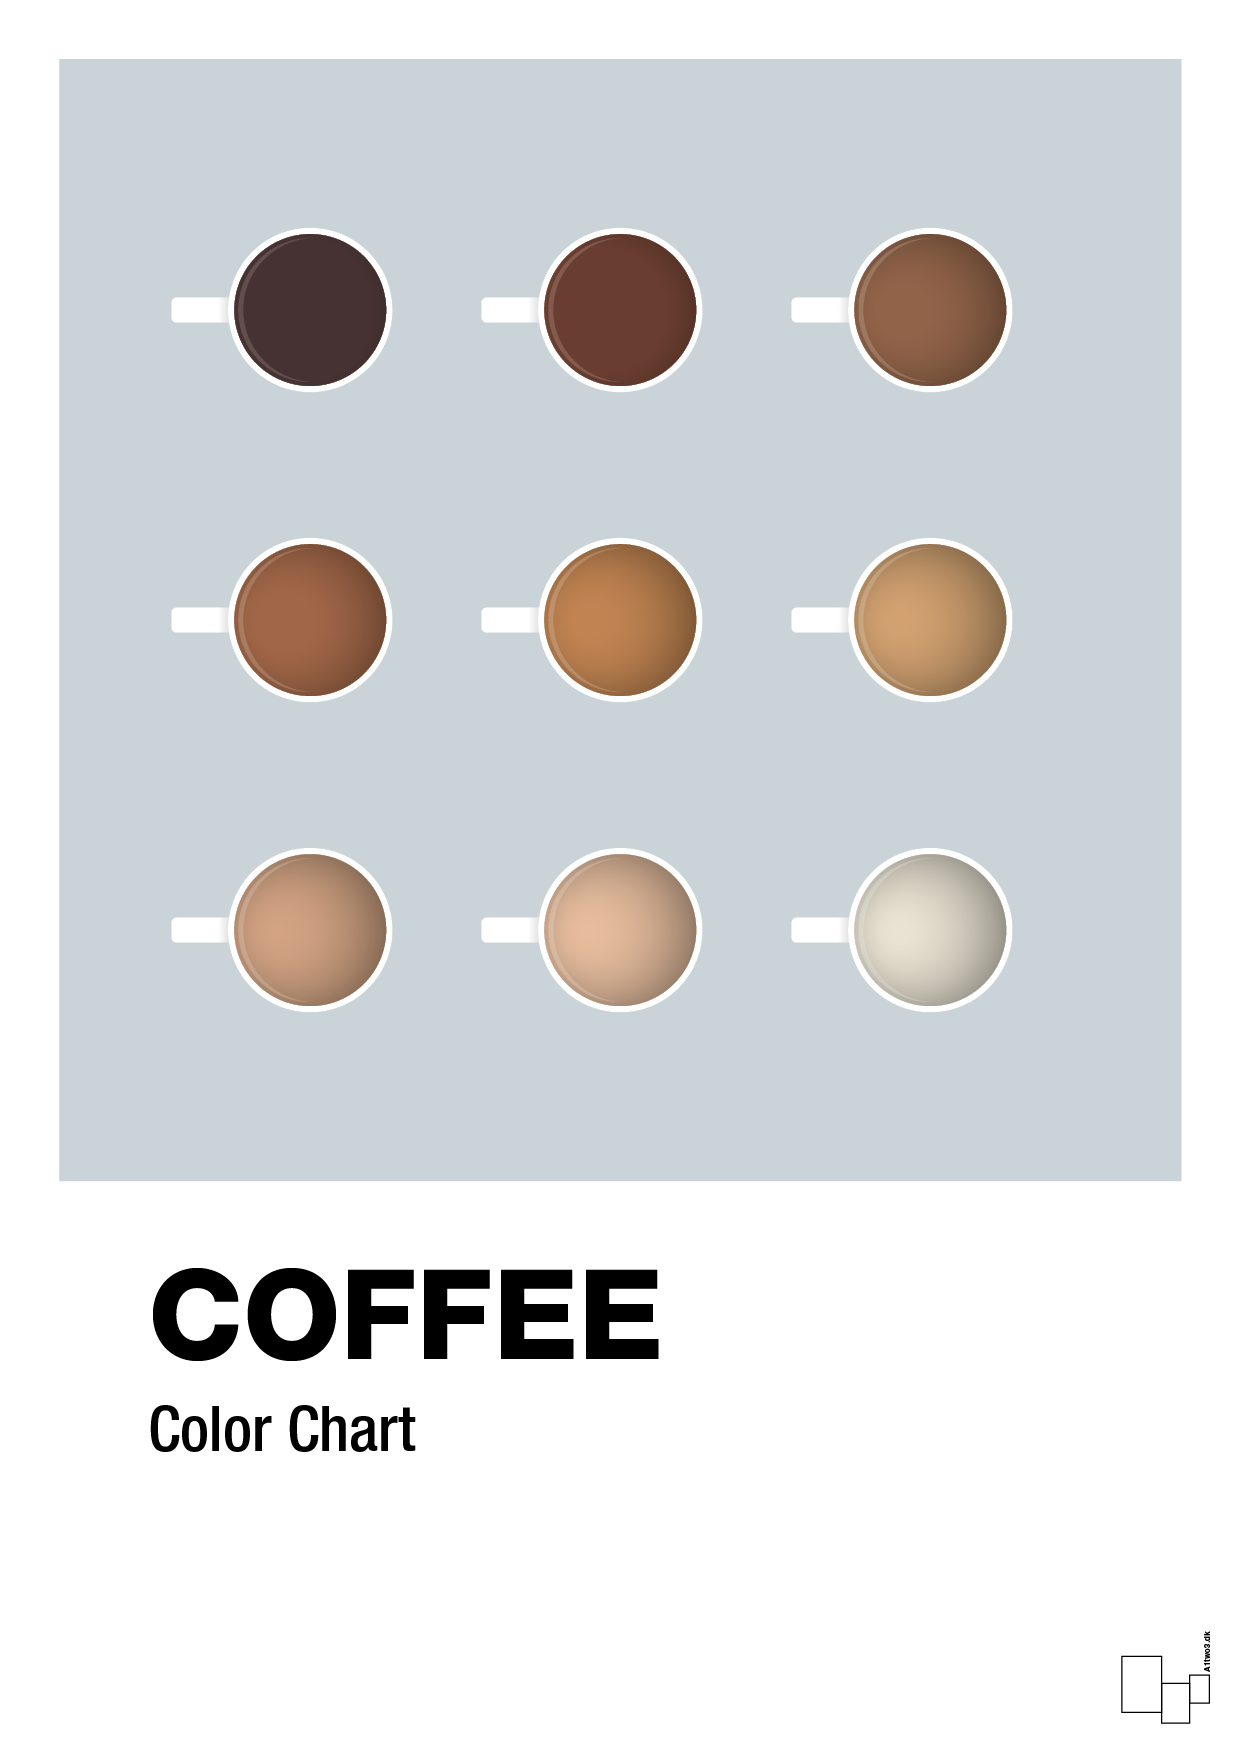 coffee color chart - Plakat med Mad & Drikke i Light Drizzle